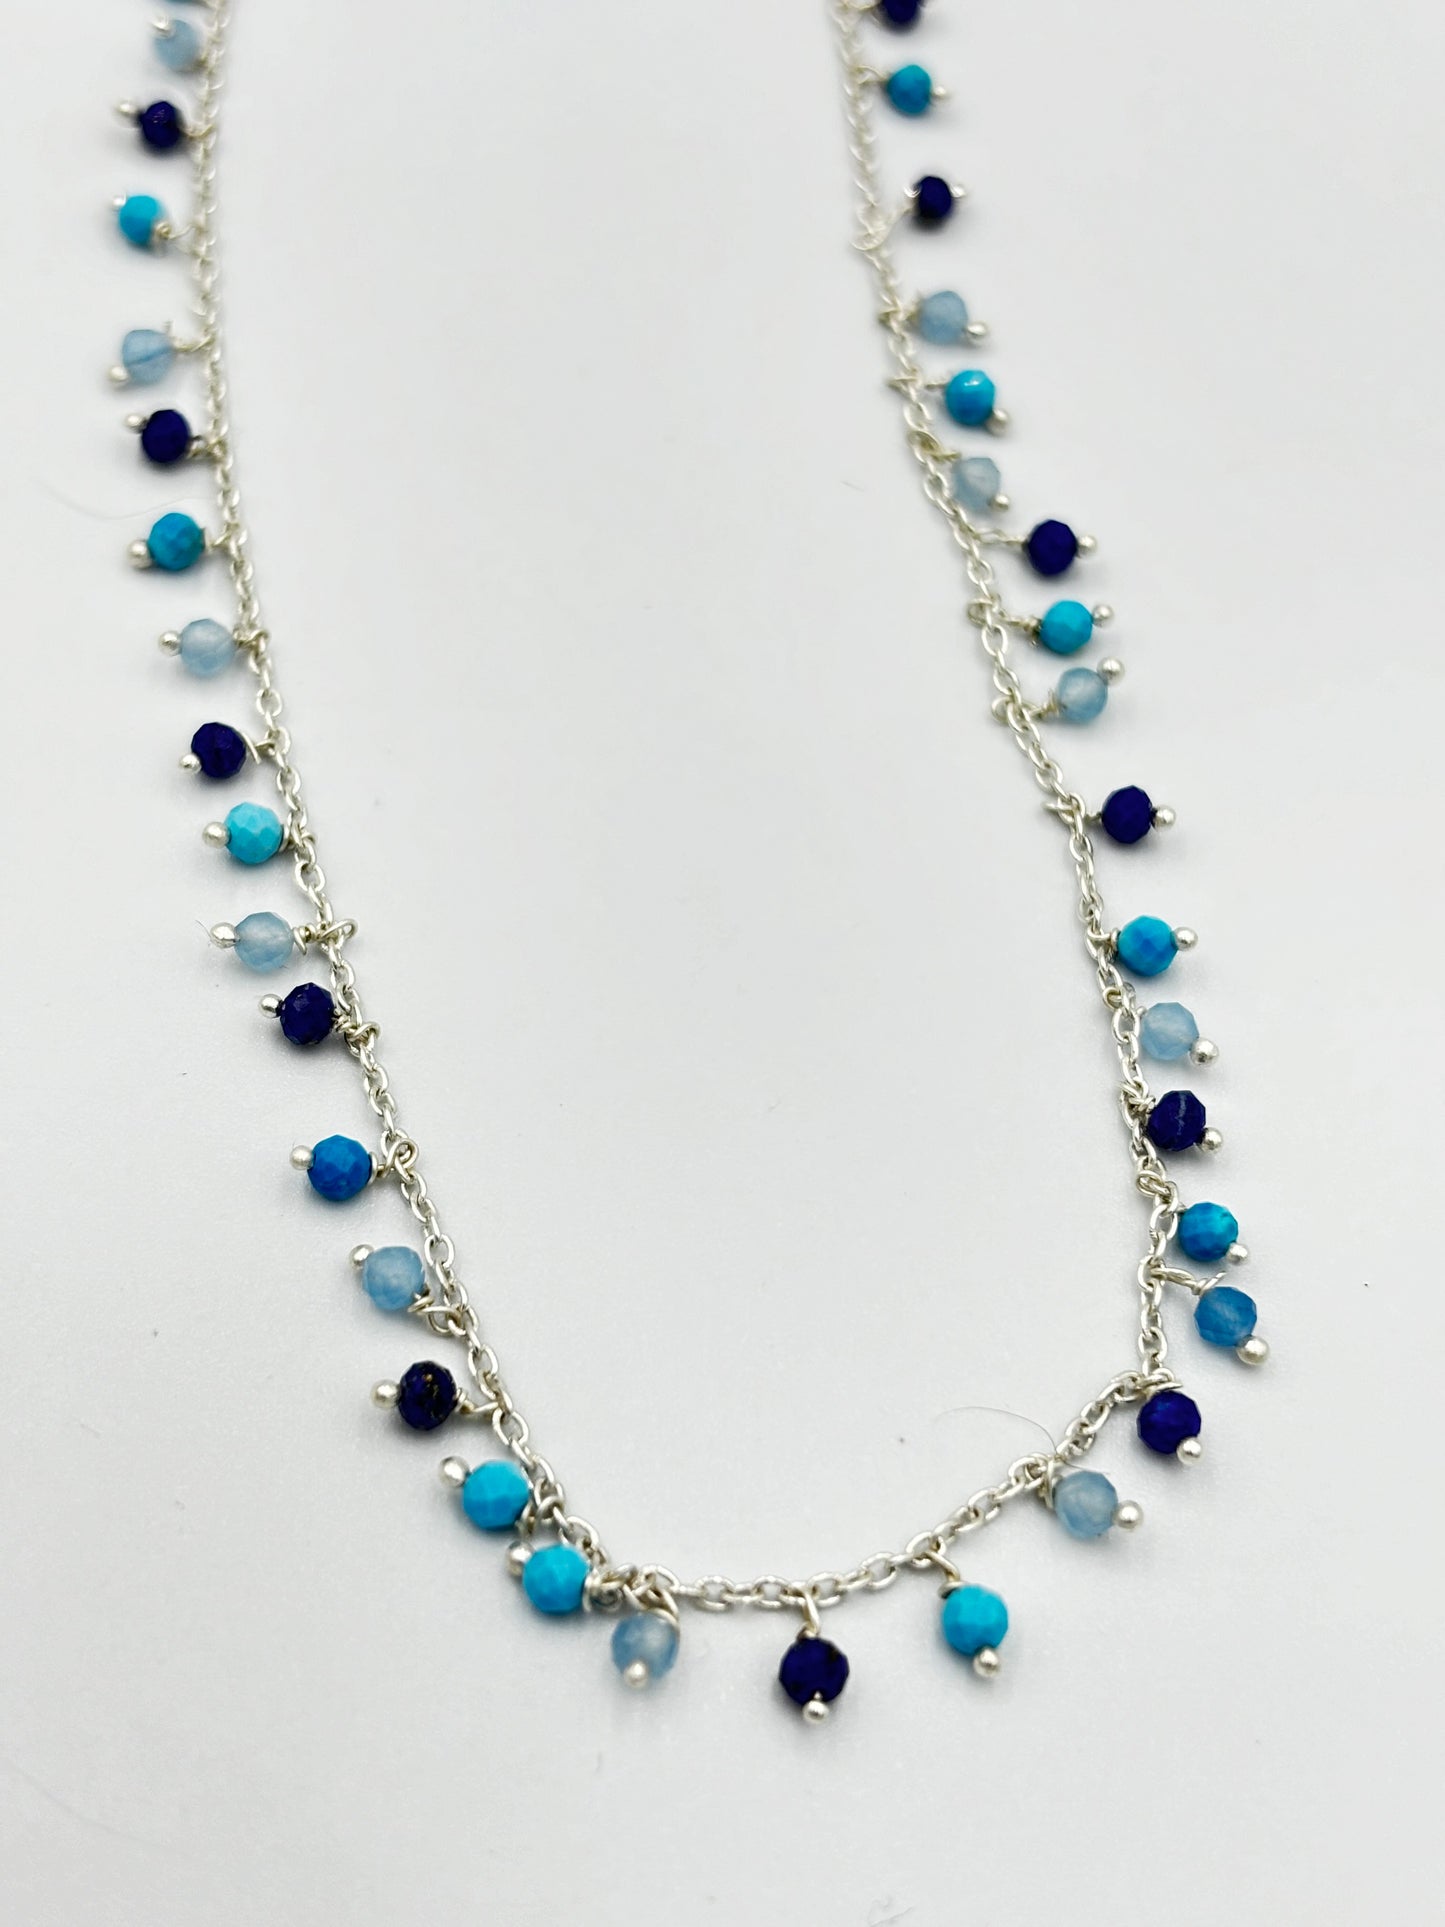 Sterling silver necklace with lots of Turquoise, Lapis and Calcy semi precious stones